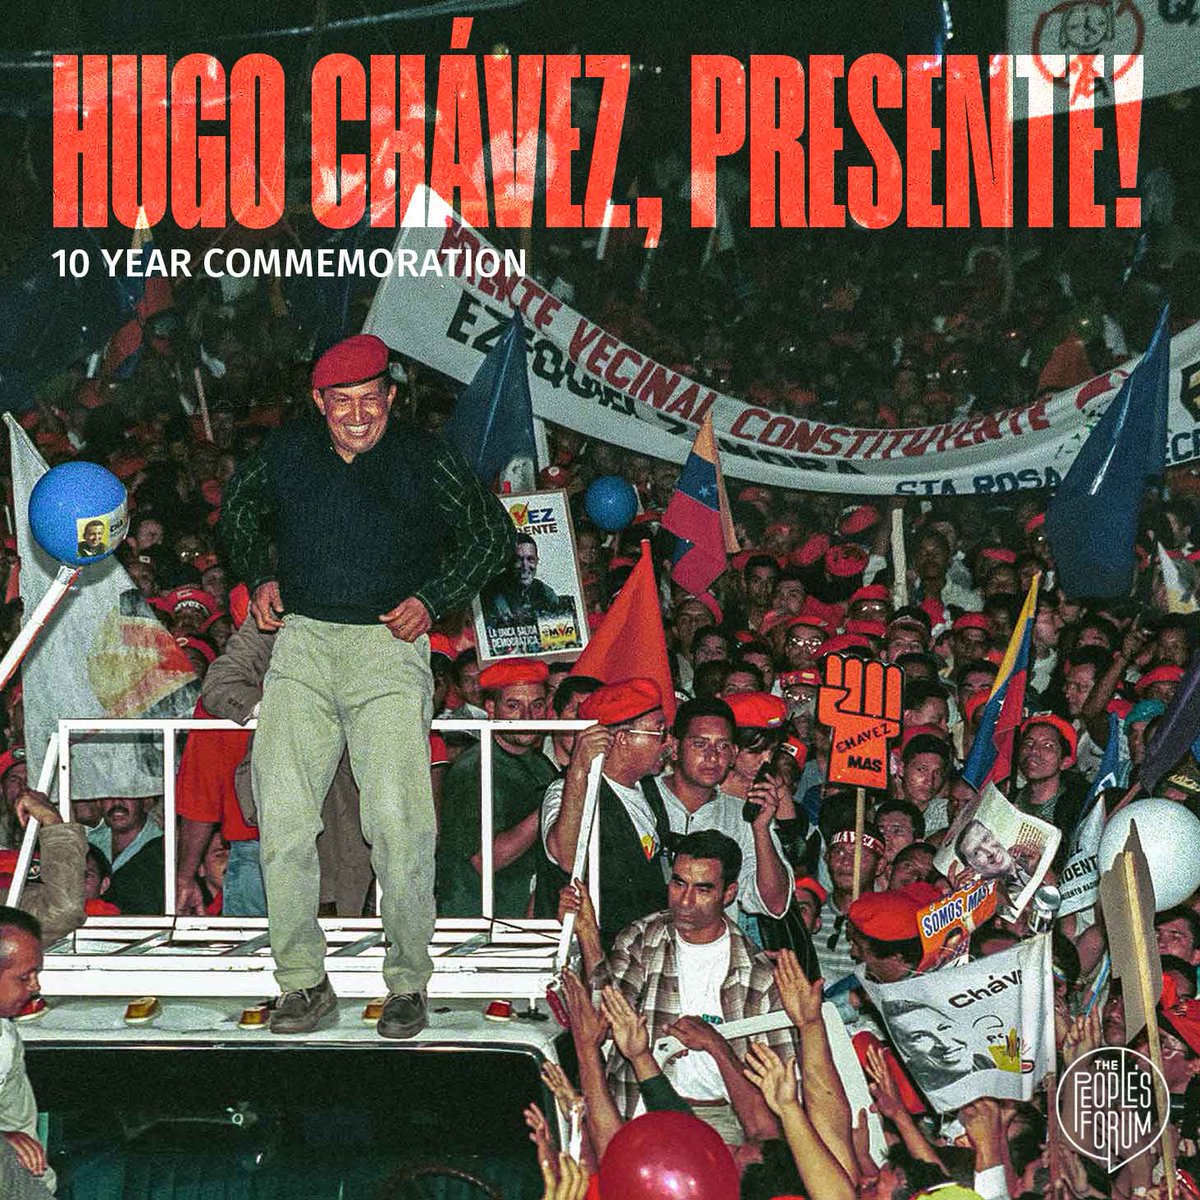 Today, we salute the life and legacy of the leader of the Bolivarian Revolution, Hugo Chávez, who passed away 10 years ago on this day. #VivaChávez

A thread 🧵